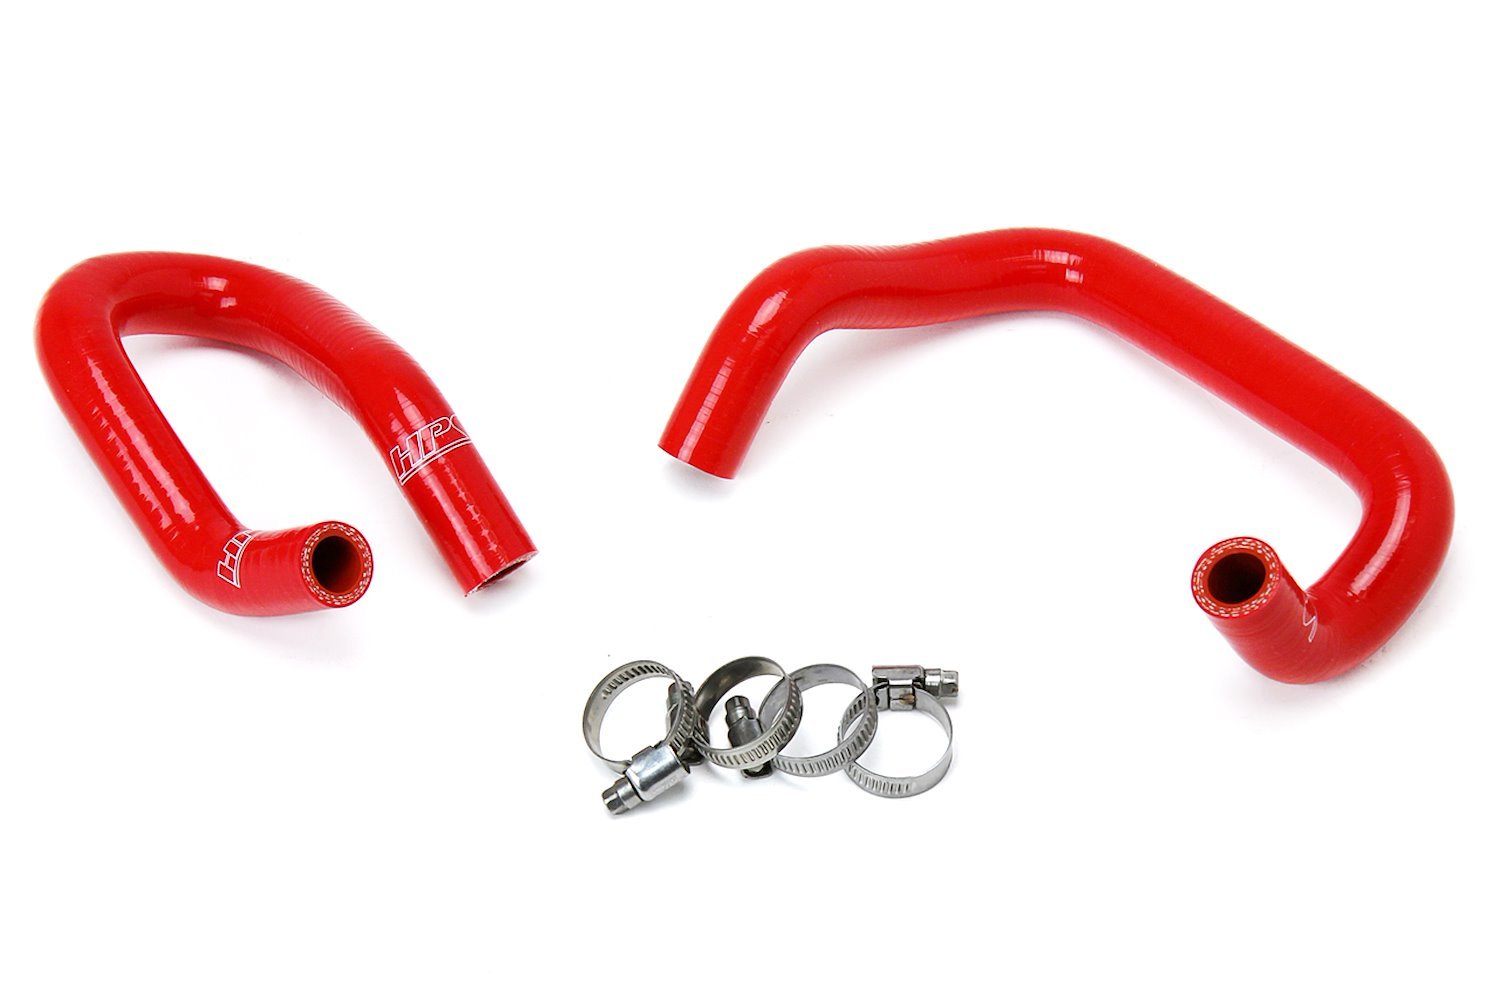 57-1586-RED Heater Hose Kit, High-Temp 3-Ply Reinforced Silicone, Replace OEM Rubber Heater Coolant Hoses